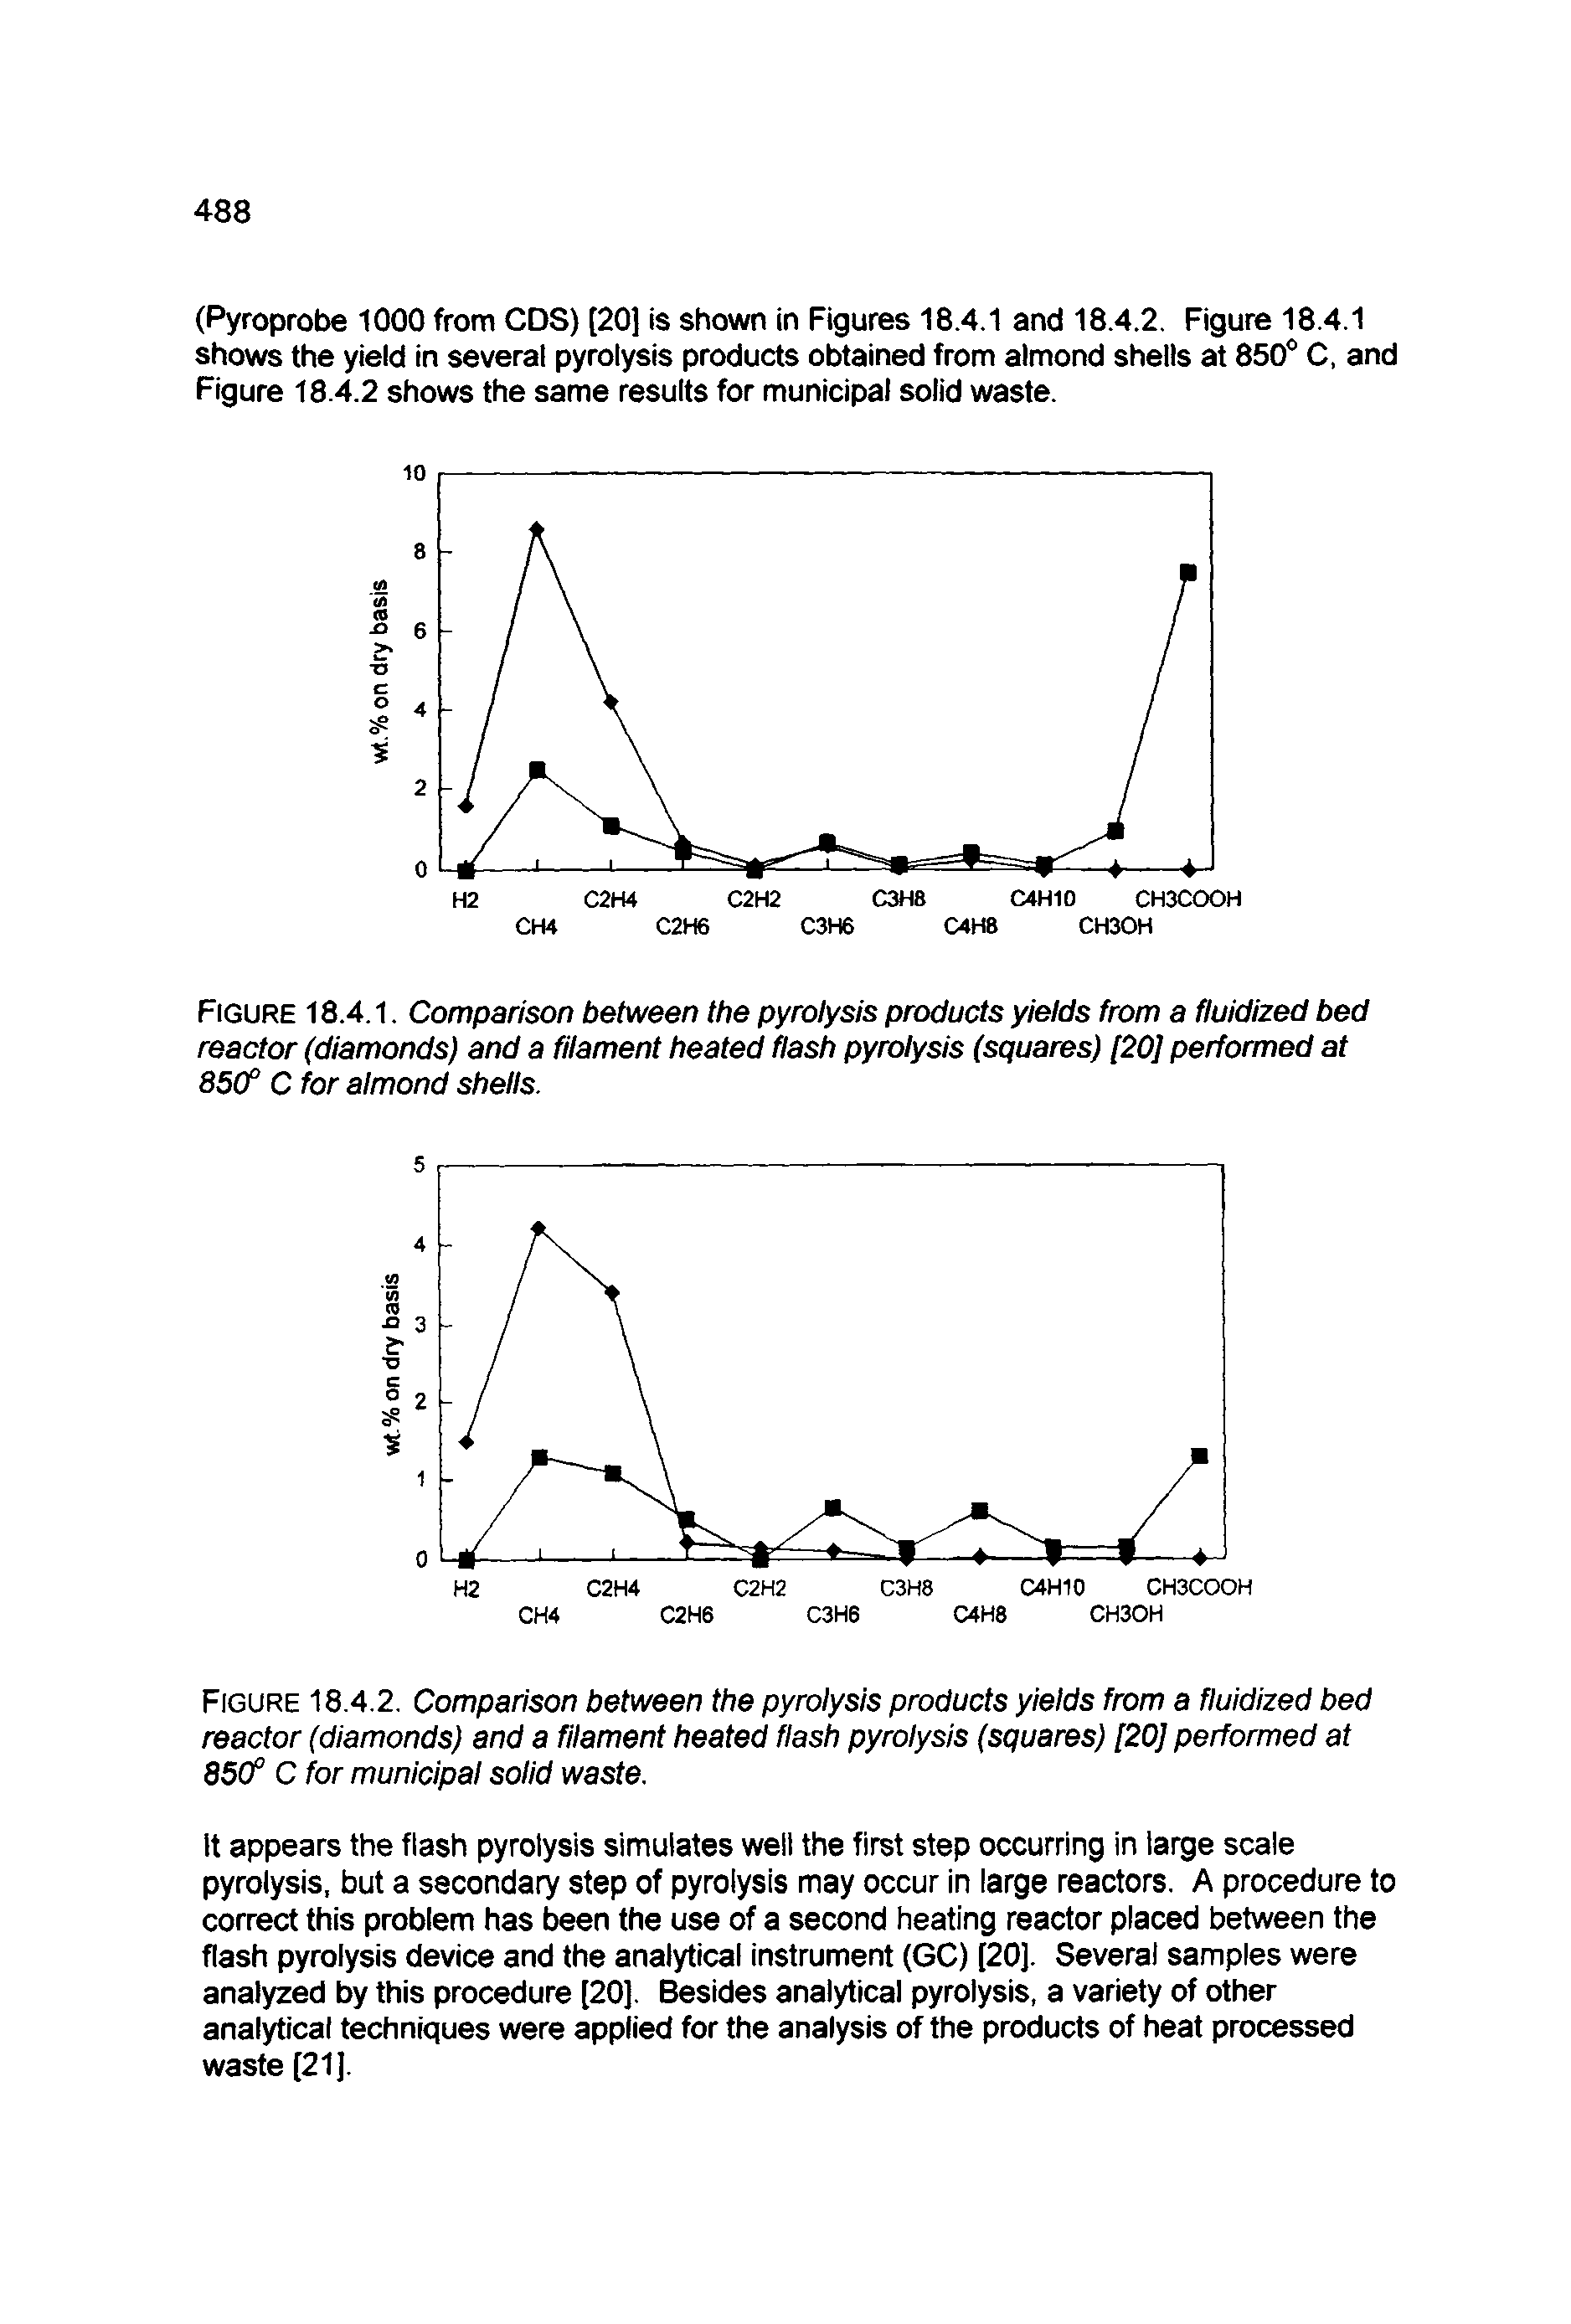 Figure 18.4.1. Comparison between the pyrolysis products yields from a fluidized bed reactor (diamonds) and a filament heated flash pyrolysis (squares) [20] performed at 850° C for almond shells.